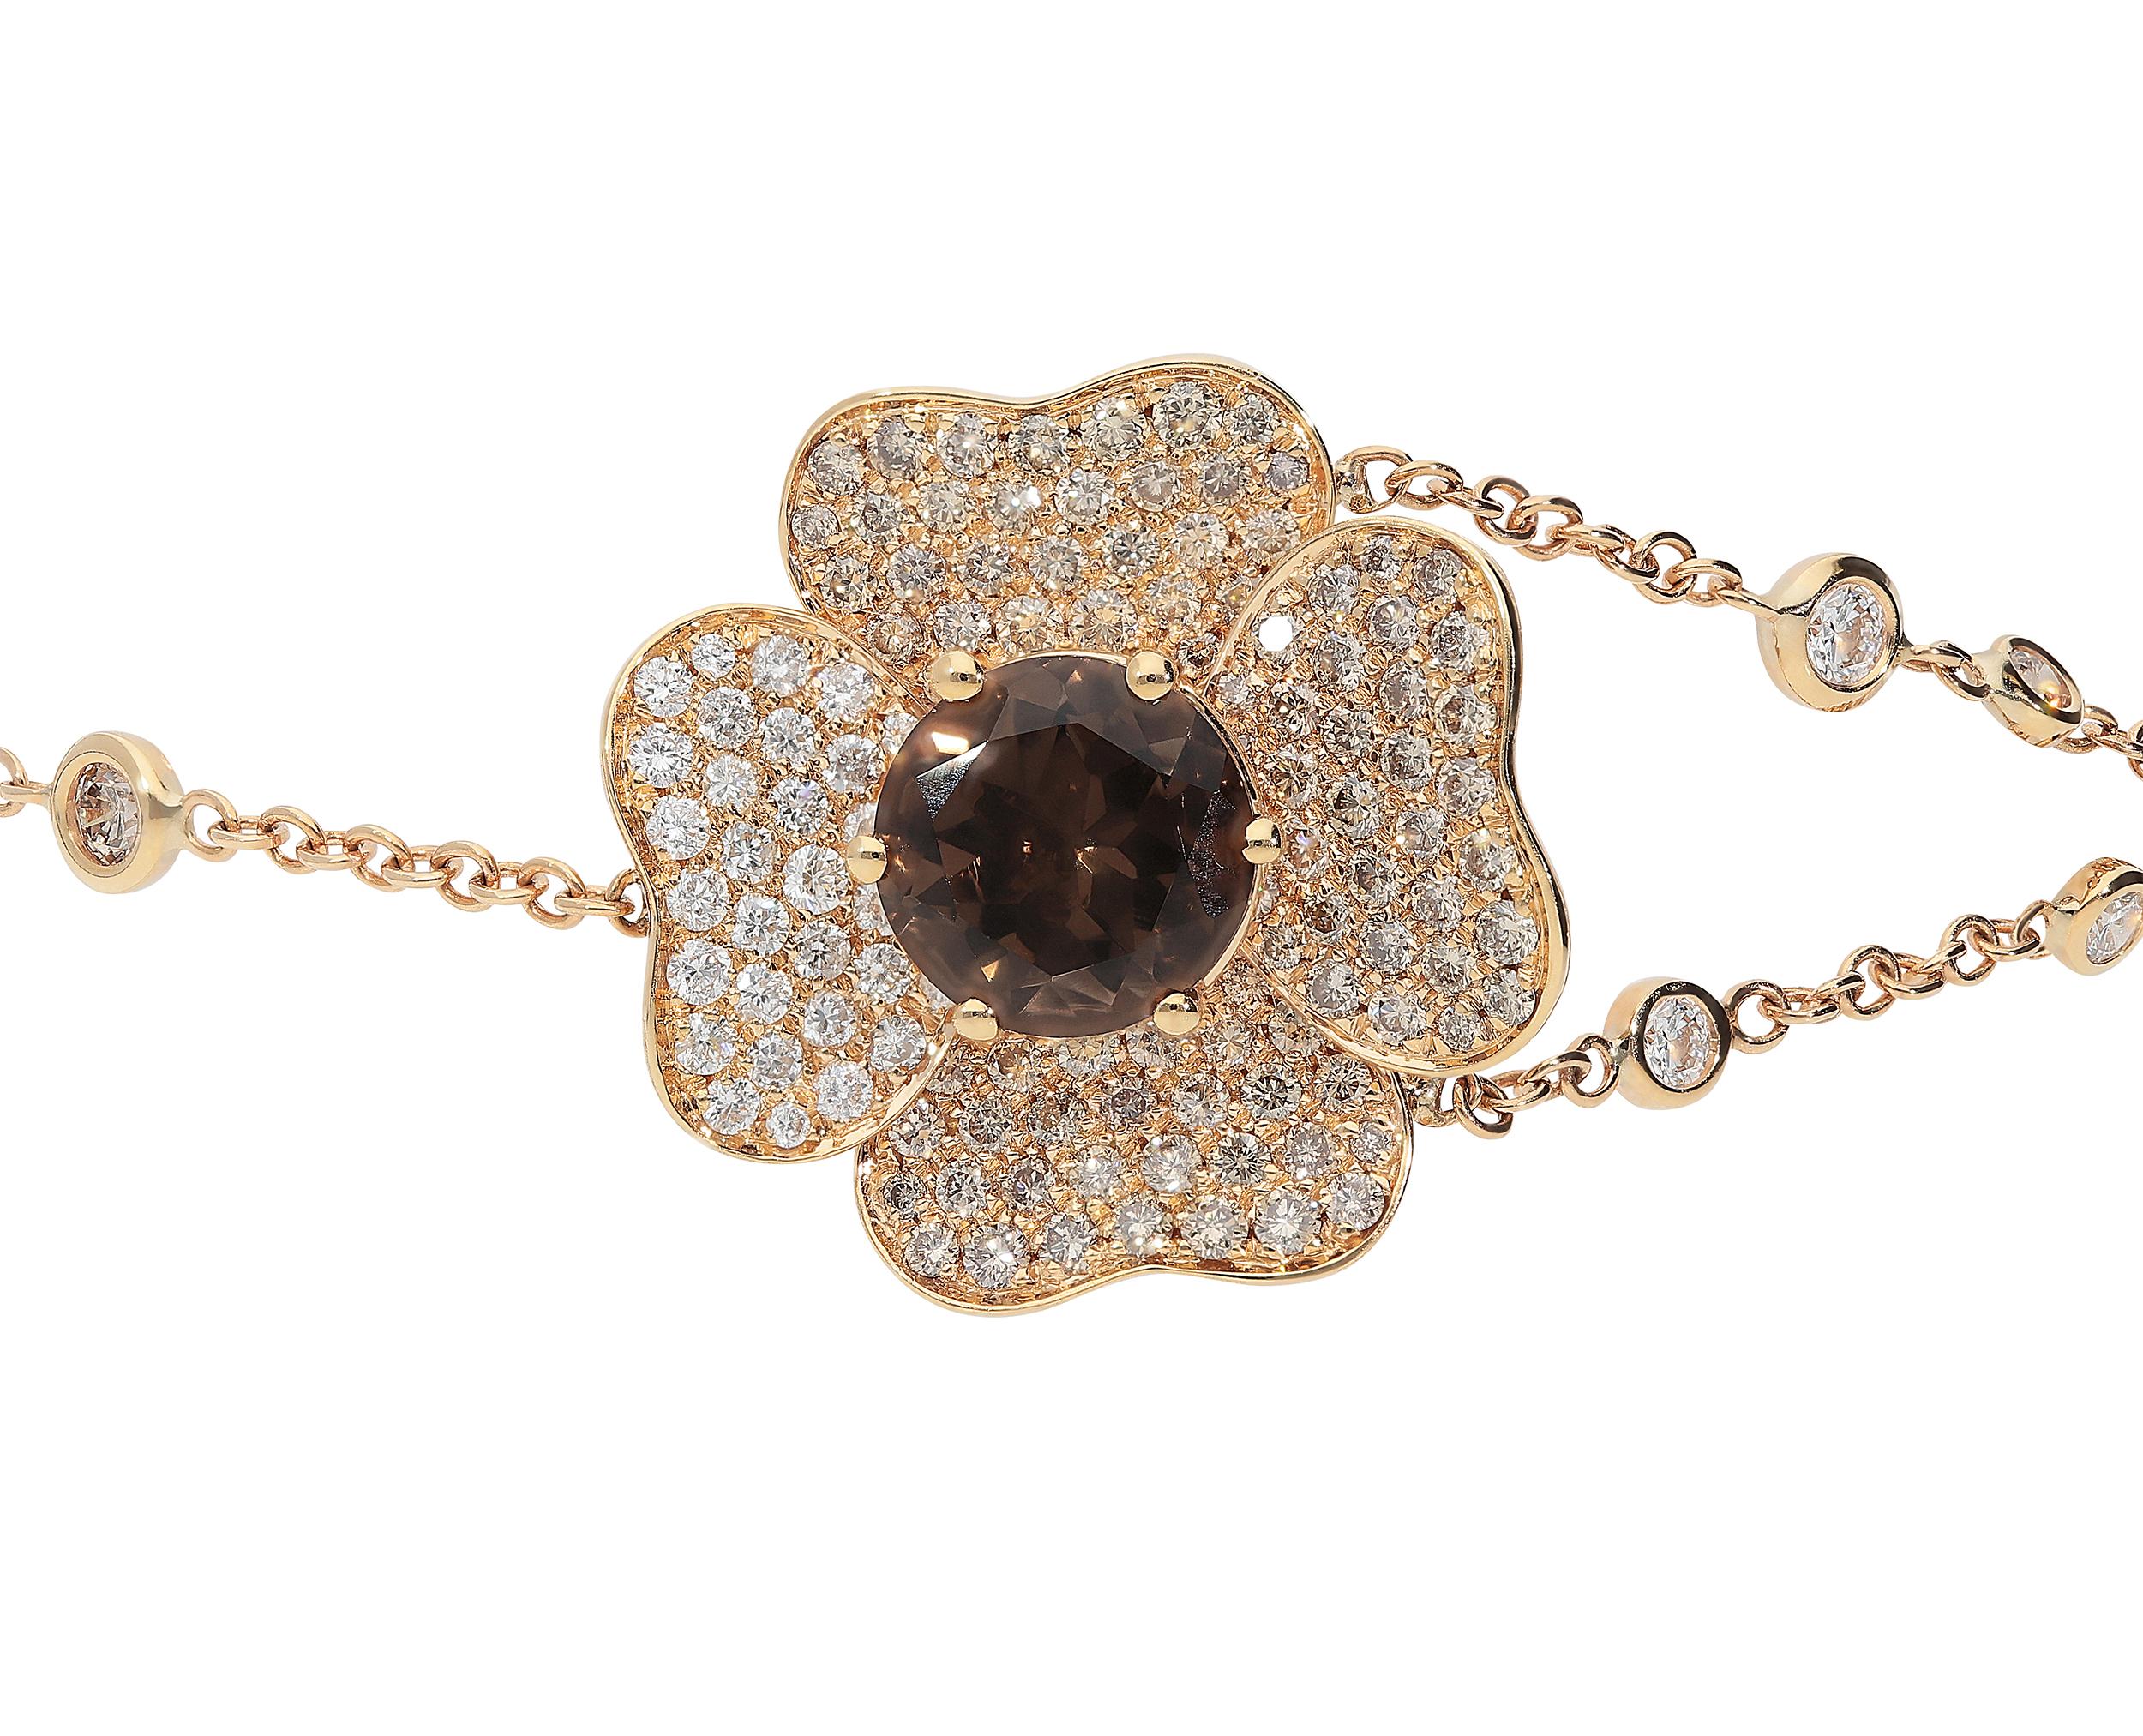 Fine bracelet in 18kt pink gold for 7,20 grams and length of 18 centimeters with resizing ring at 16 centimeters.
Main element is a flower with 3 petals set in brown diamonds and 1 petal set in white diamonds, central stone is a 8 millimeter smoky